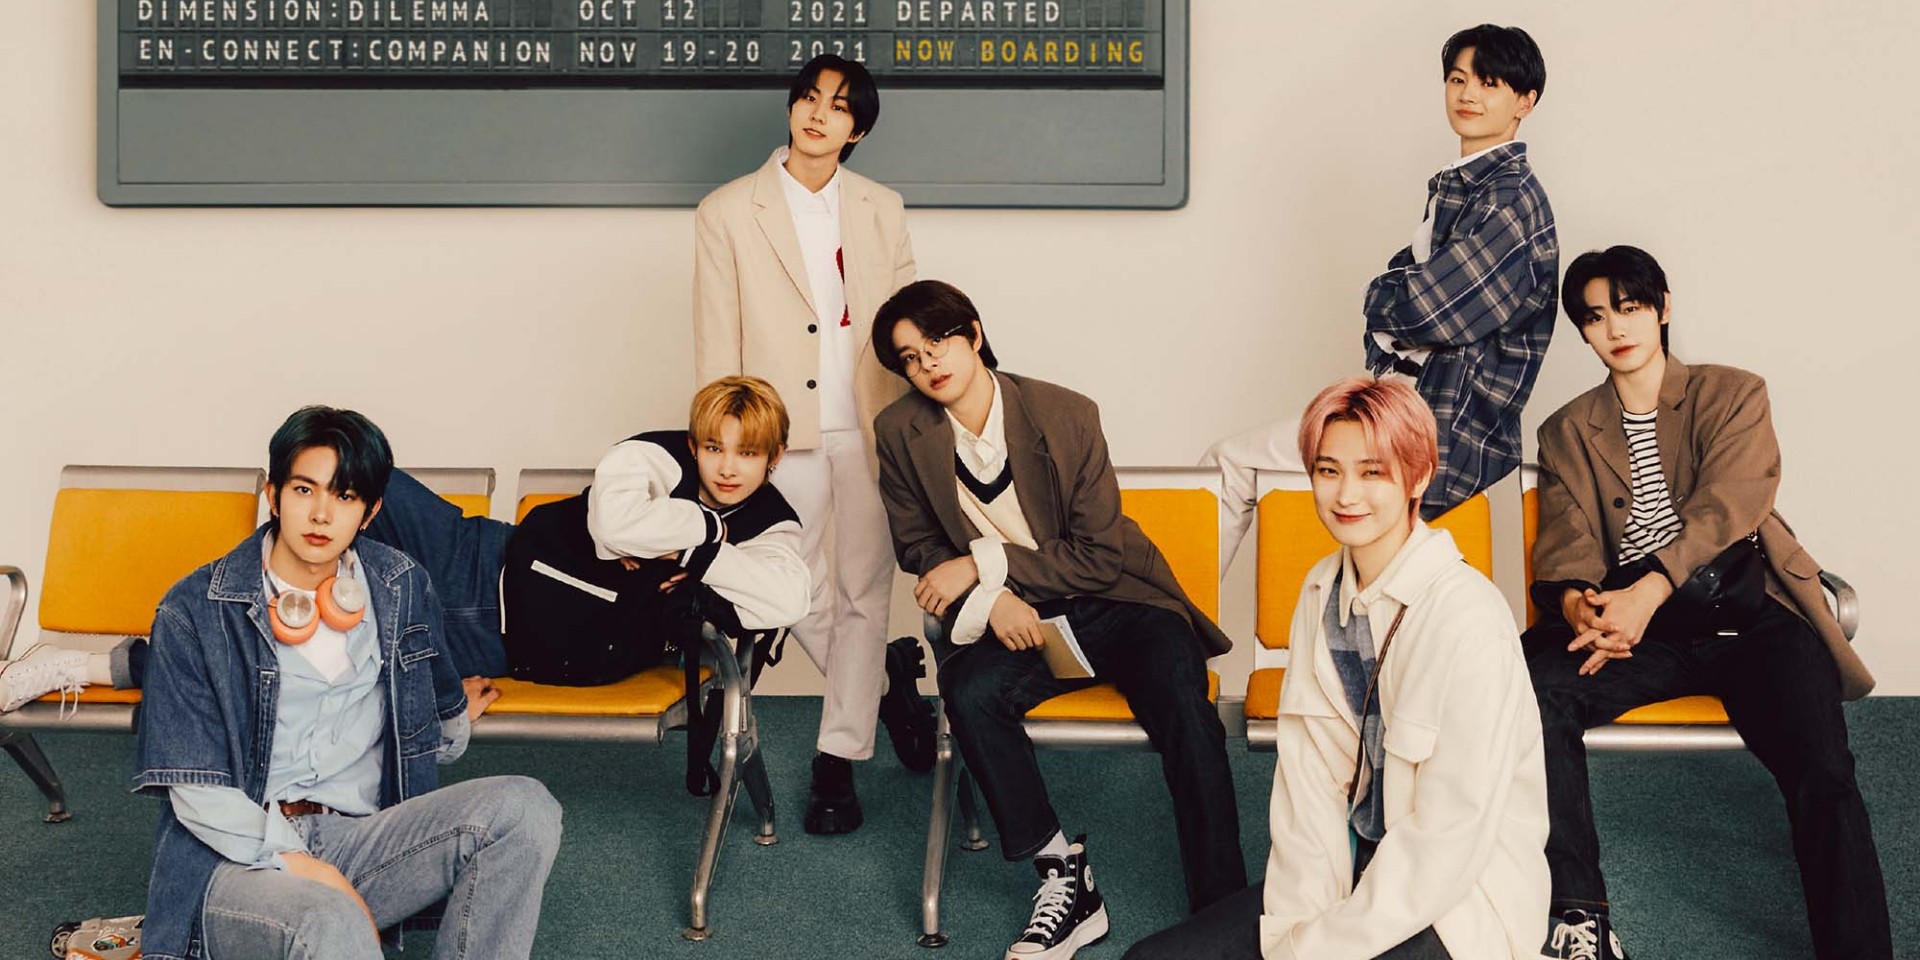 ENHYPEN to hold anniversary concert 'EN-CONNECT : COMPANION' this November 